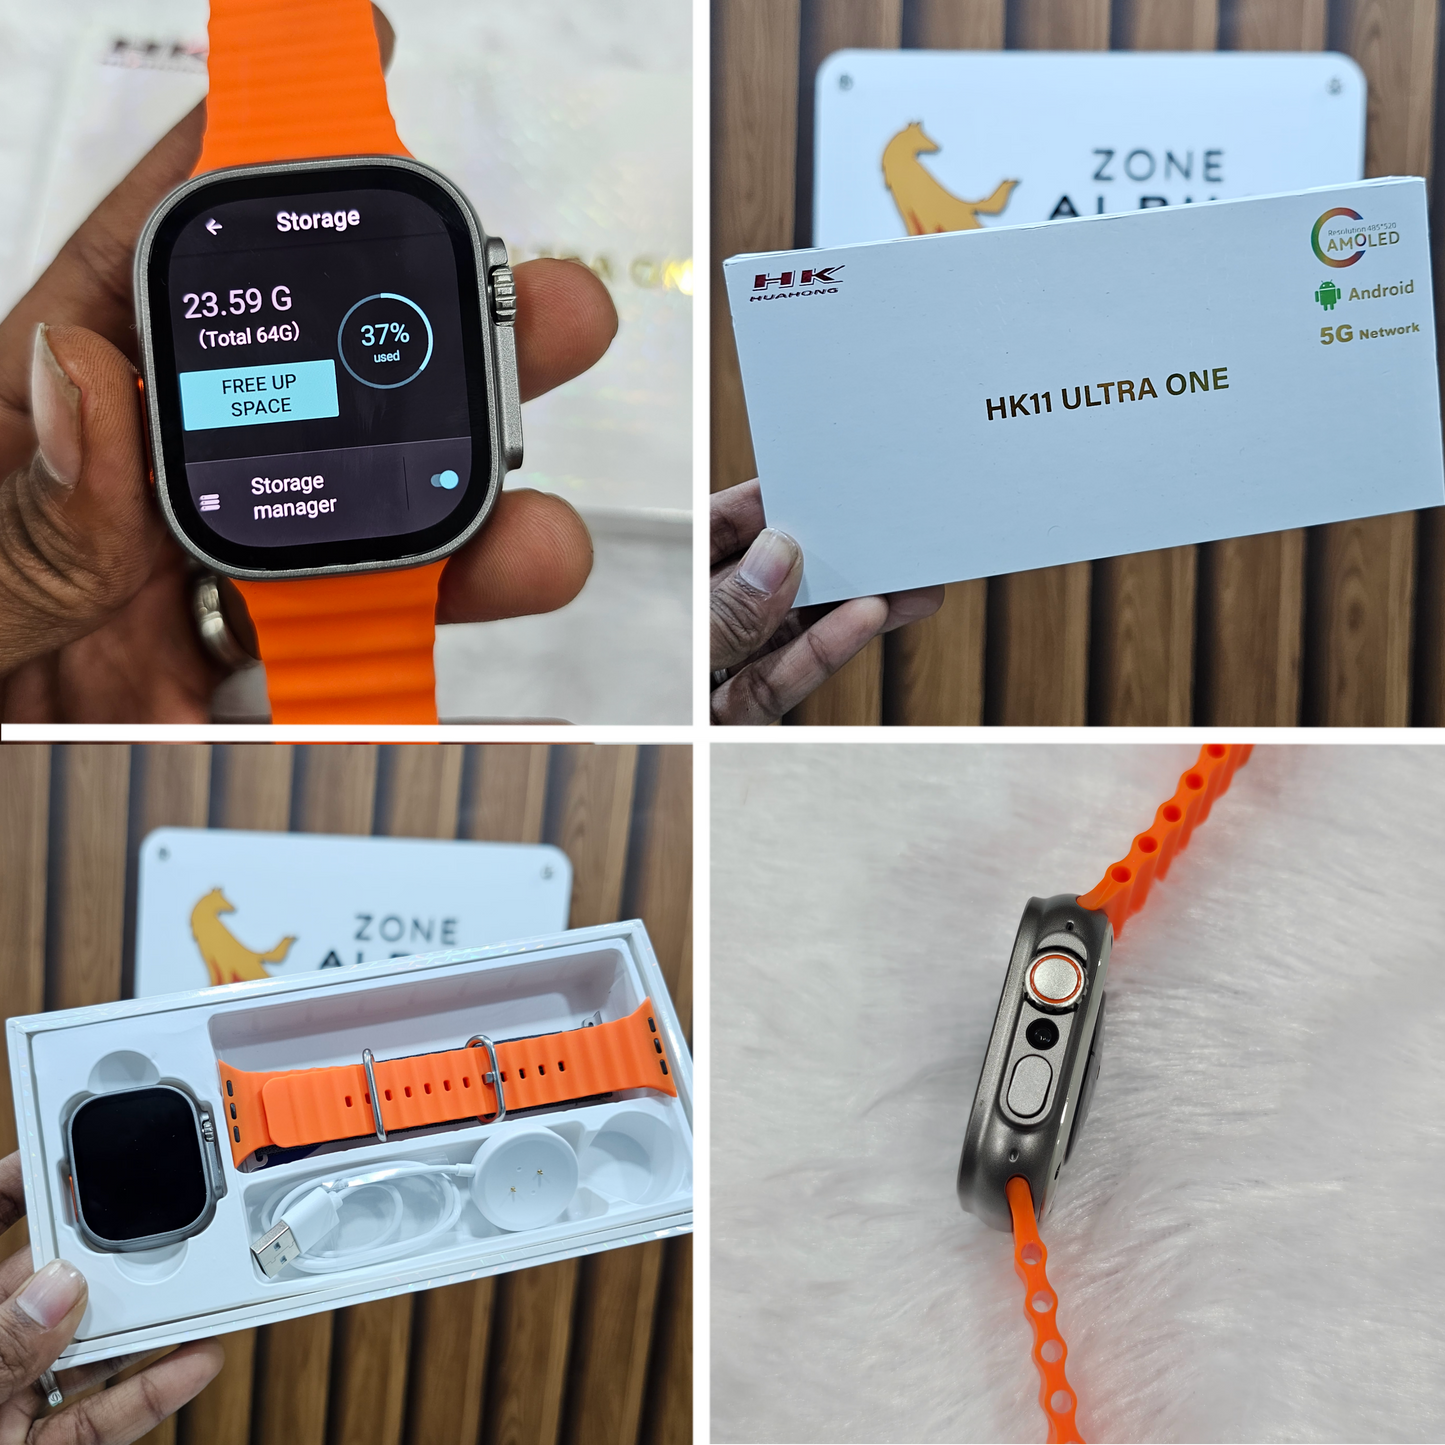 HK11 Ultra One 5G | 4GB + 64GB Super Android Smartwatch